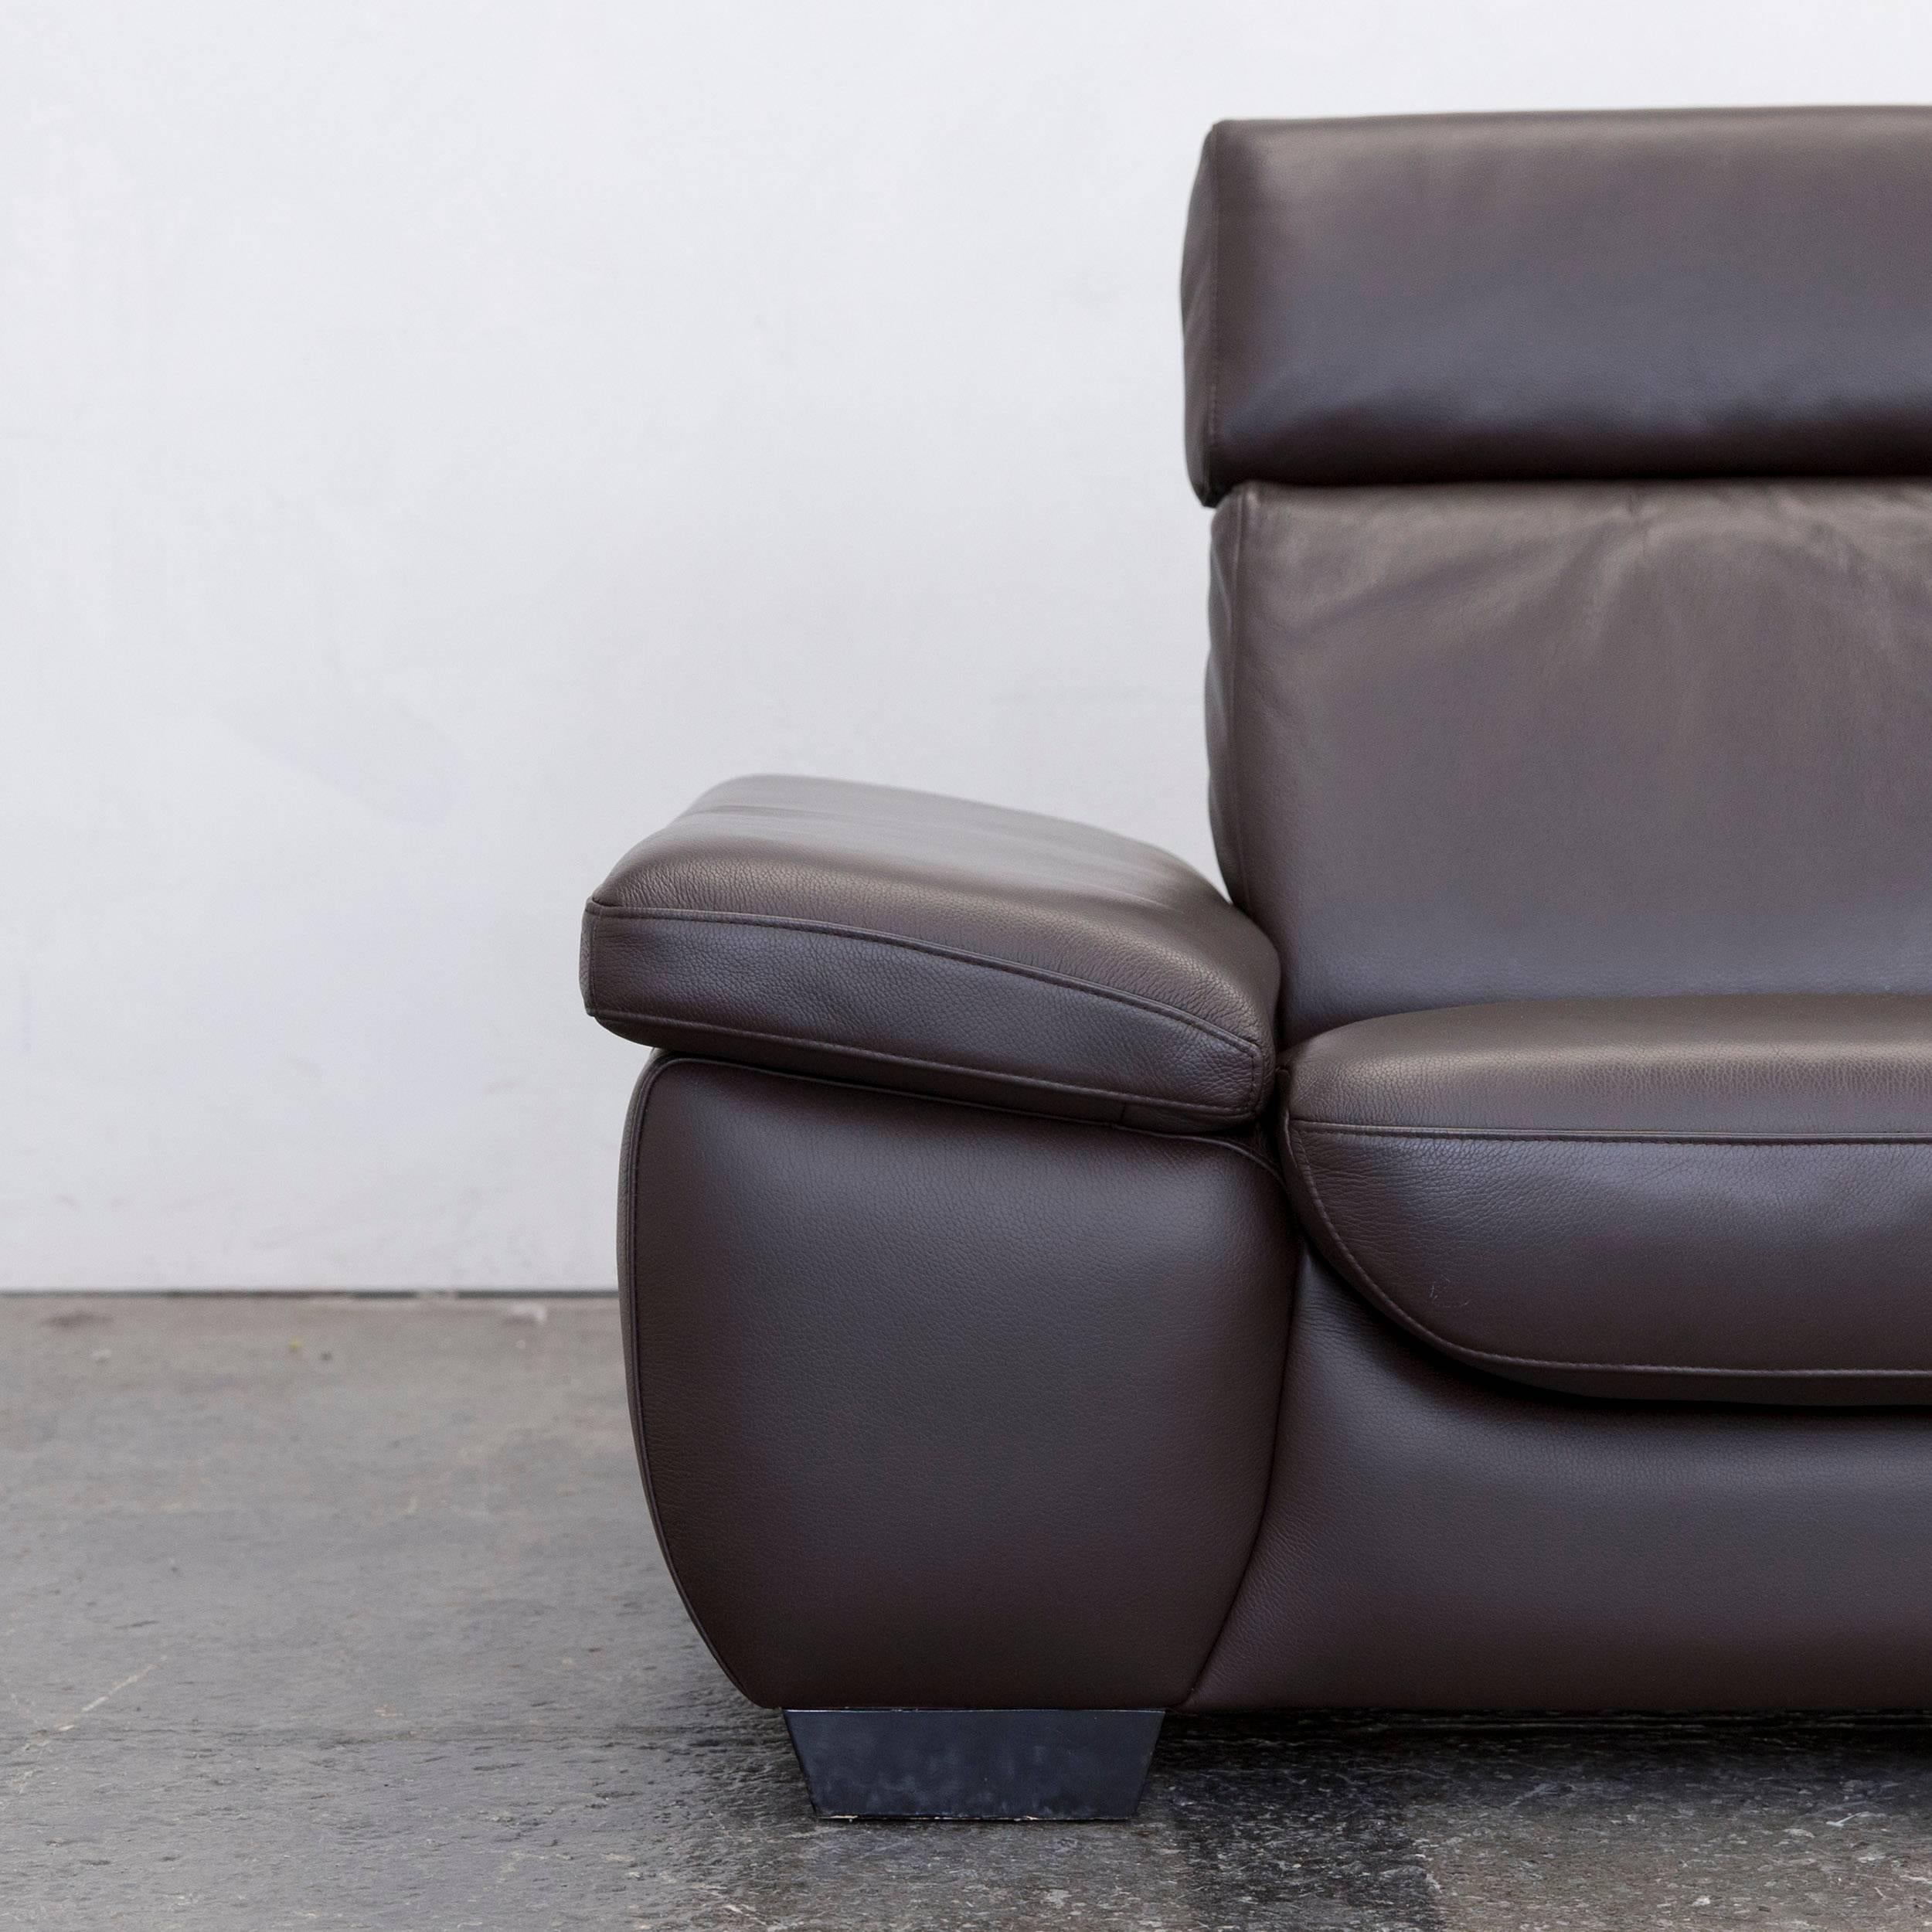 Design Two-Seat Couch Recliner Brown Leather Modern In Excellent Condition For Sale In Cologne, DE